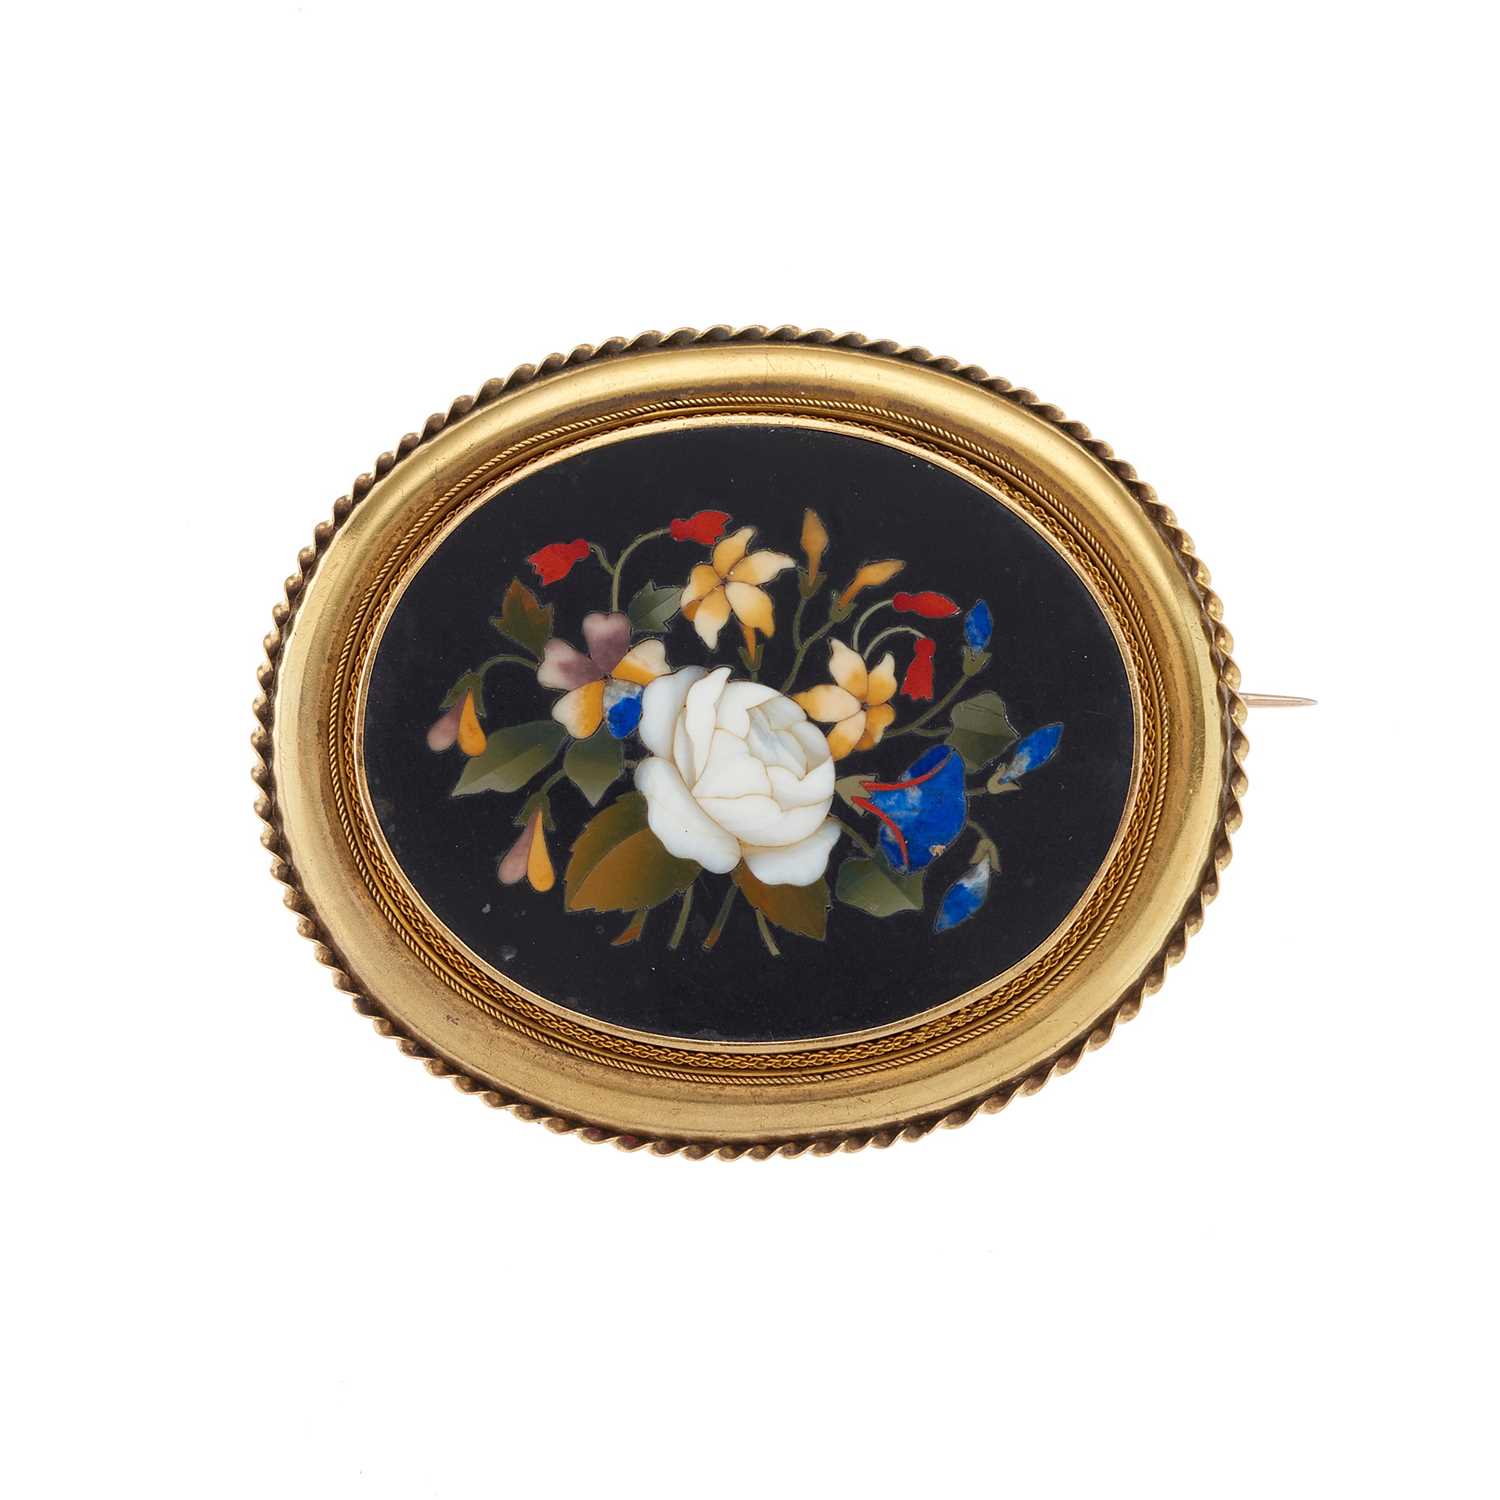 Lot 2 - A late Victorian gold pietra dura floral brooch